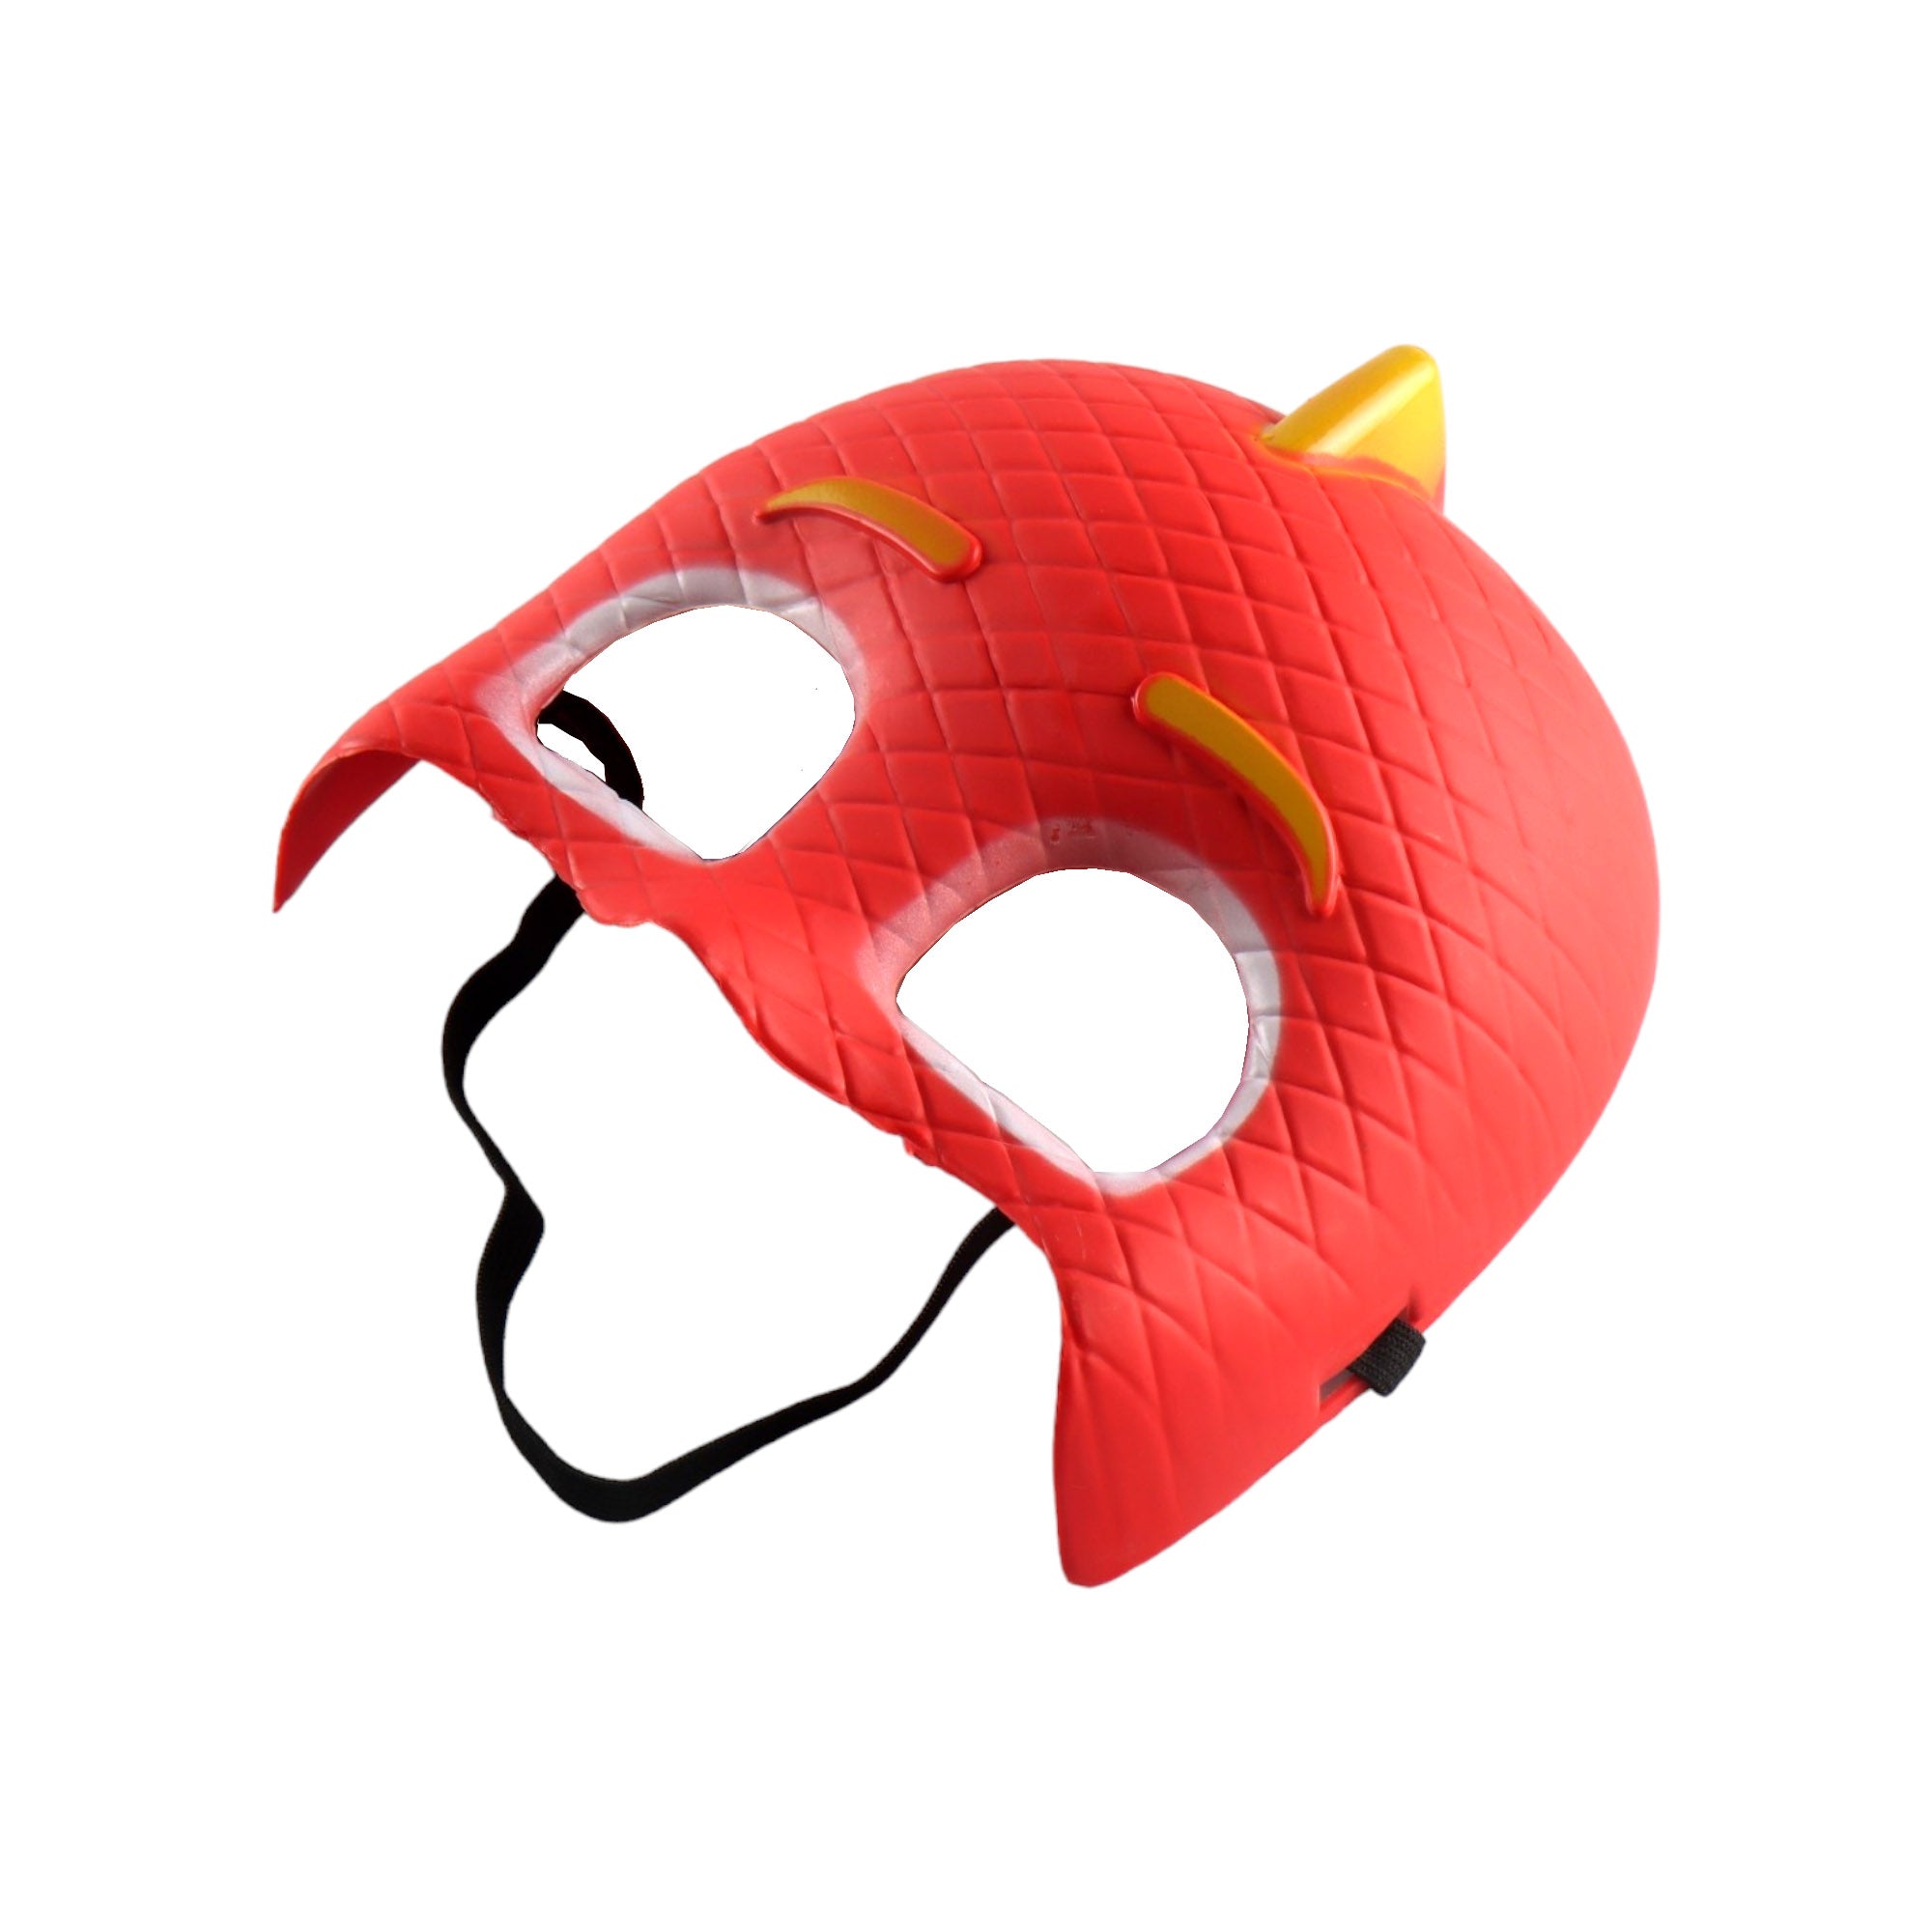 Kids Party Mask Blue or Red